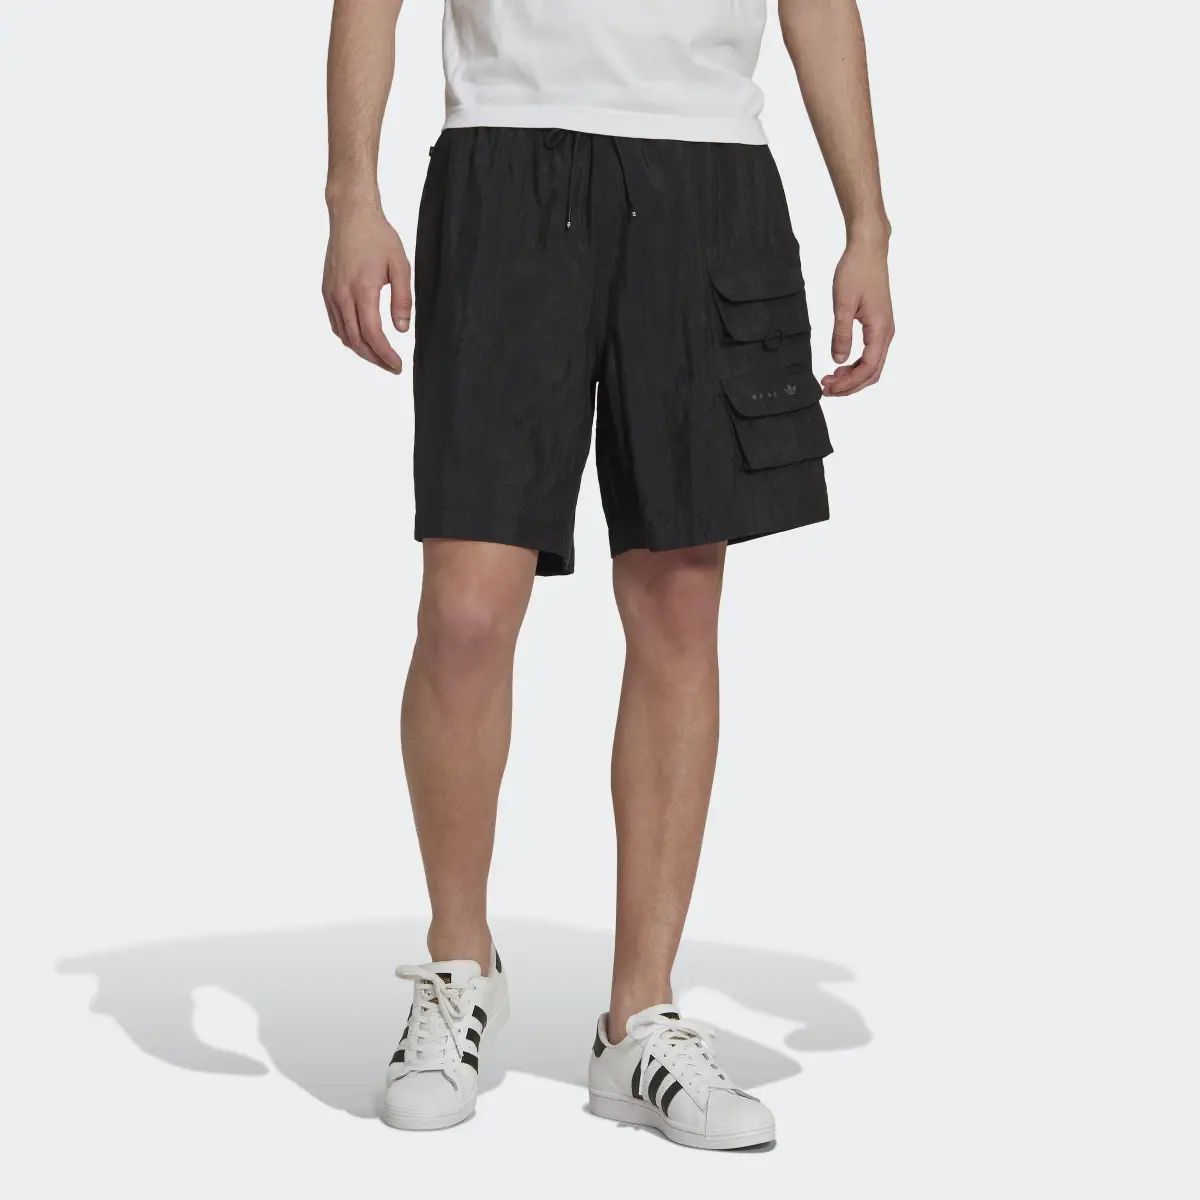 Adidas Reveal Material Mix Shorts. 1